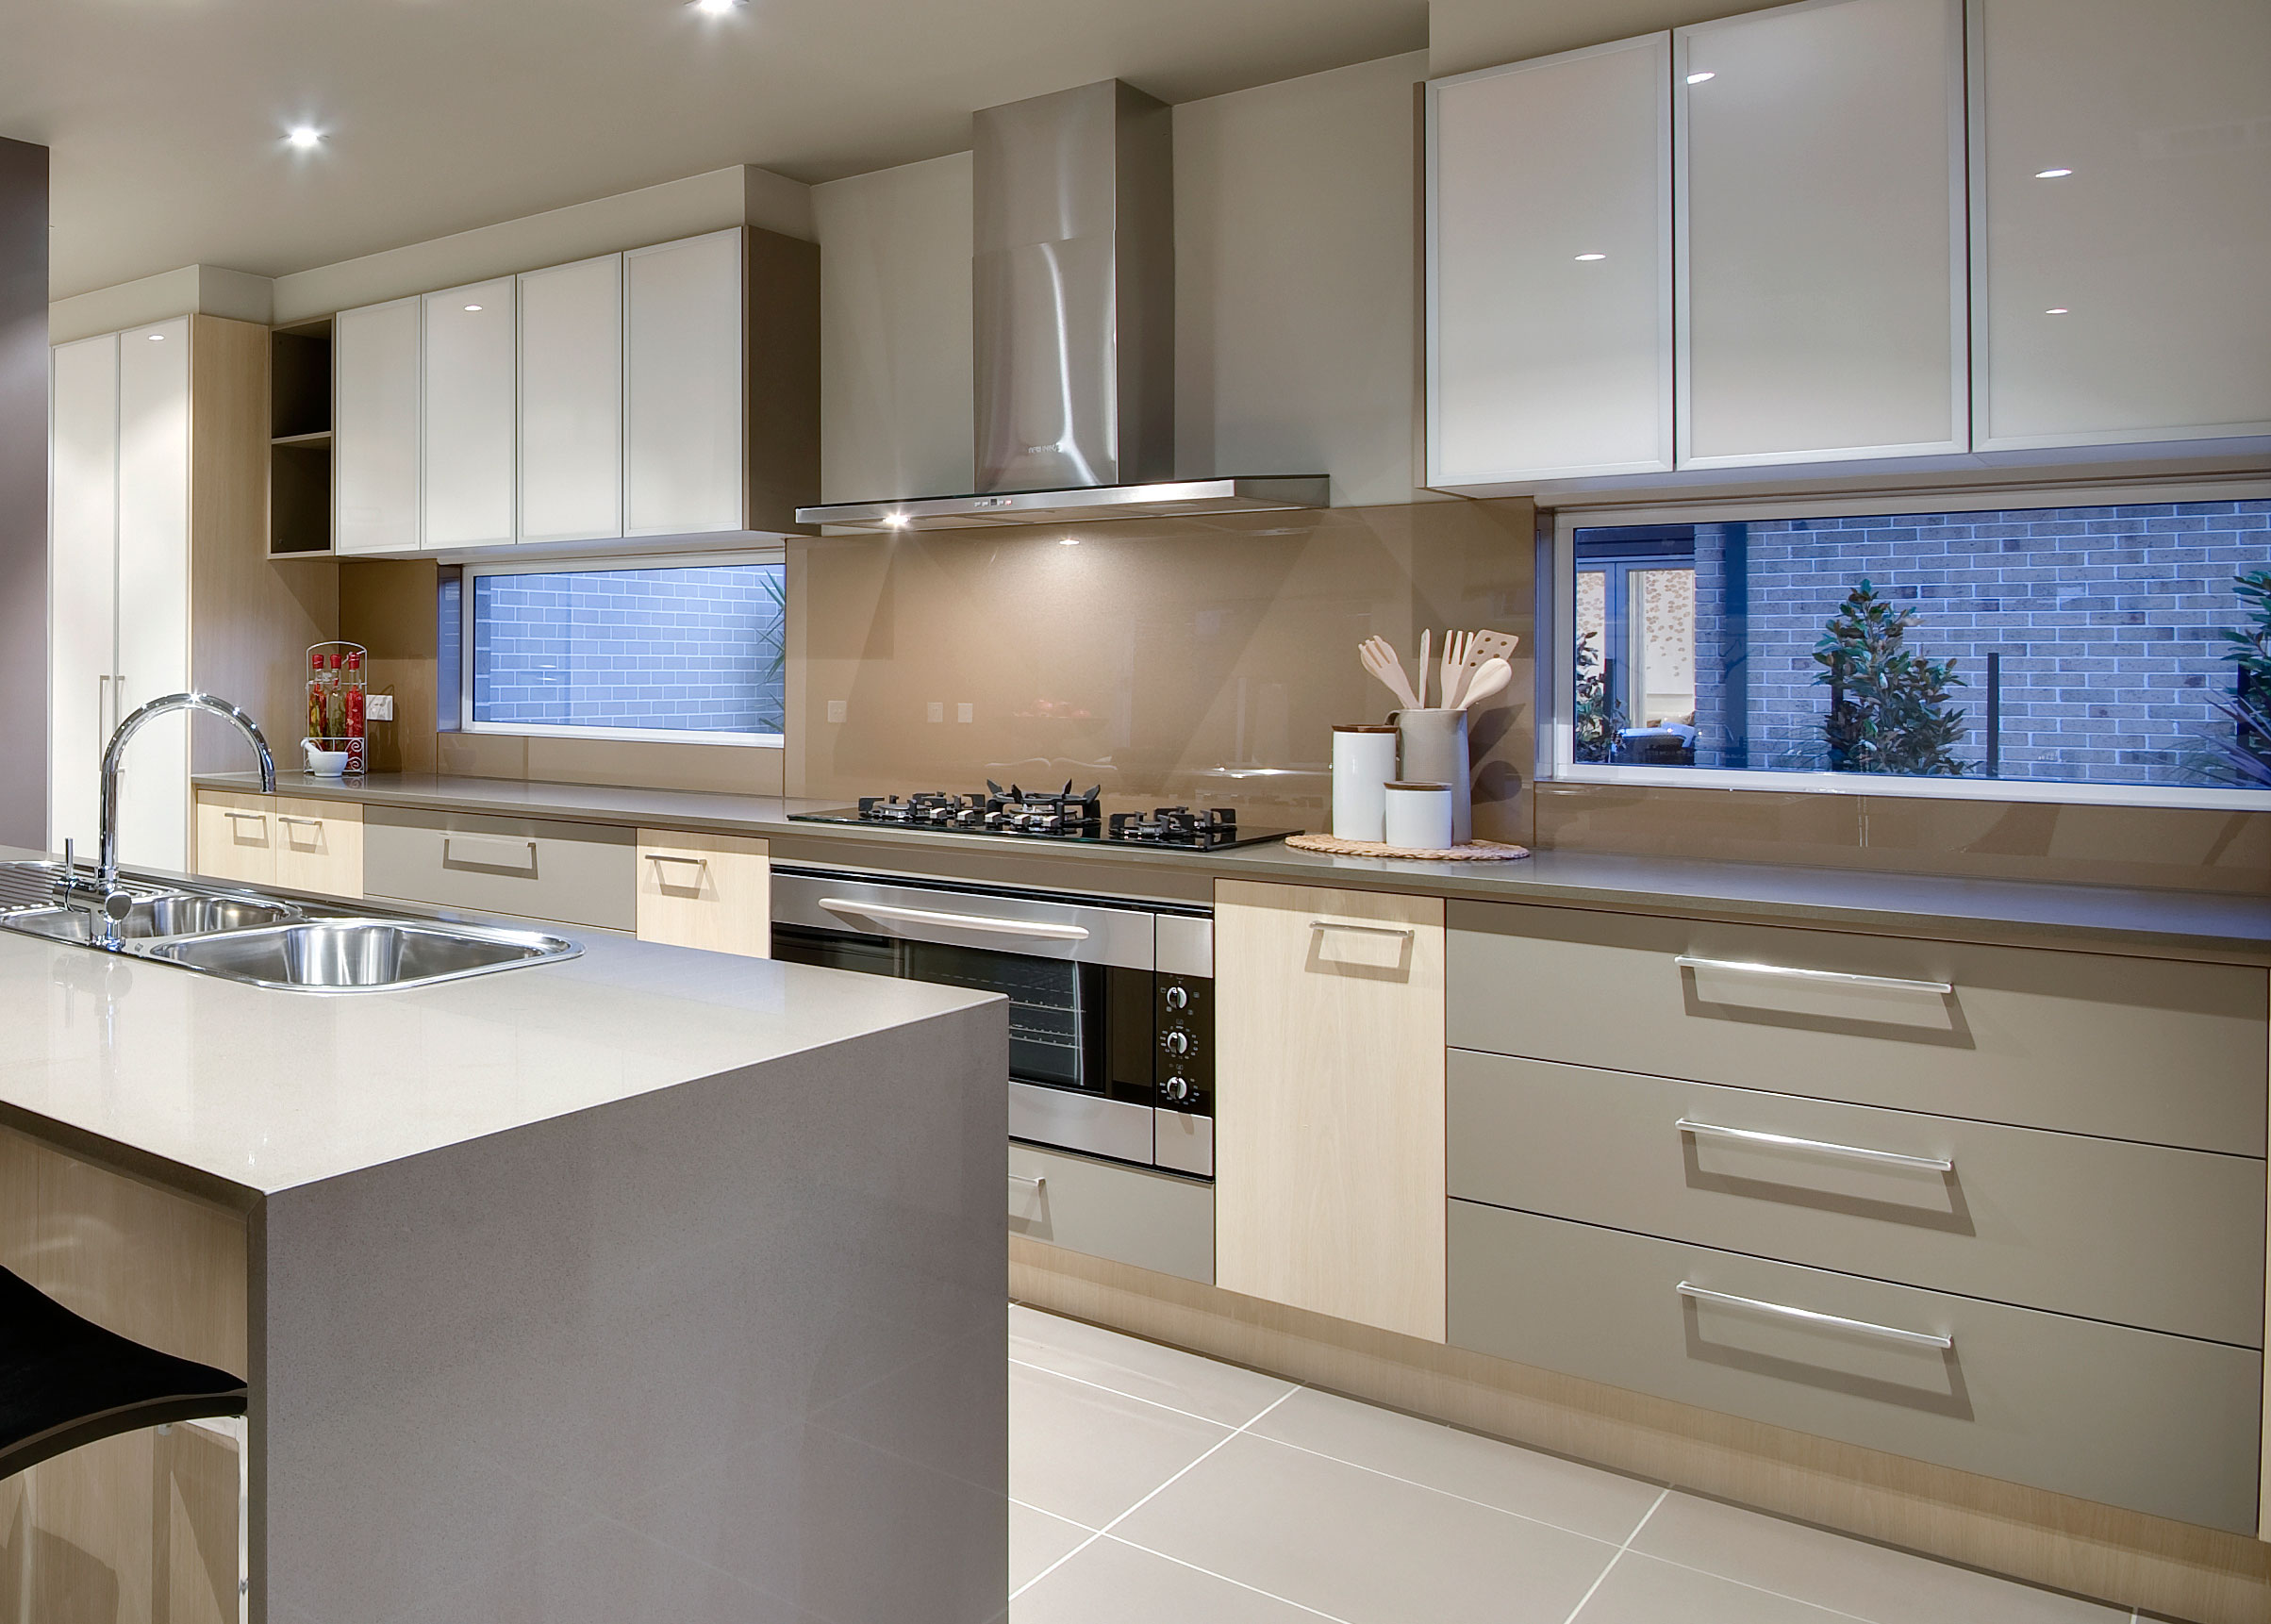 Choosing the right benchtop – popular trends to consider